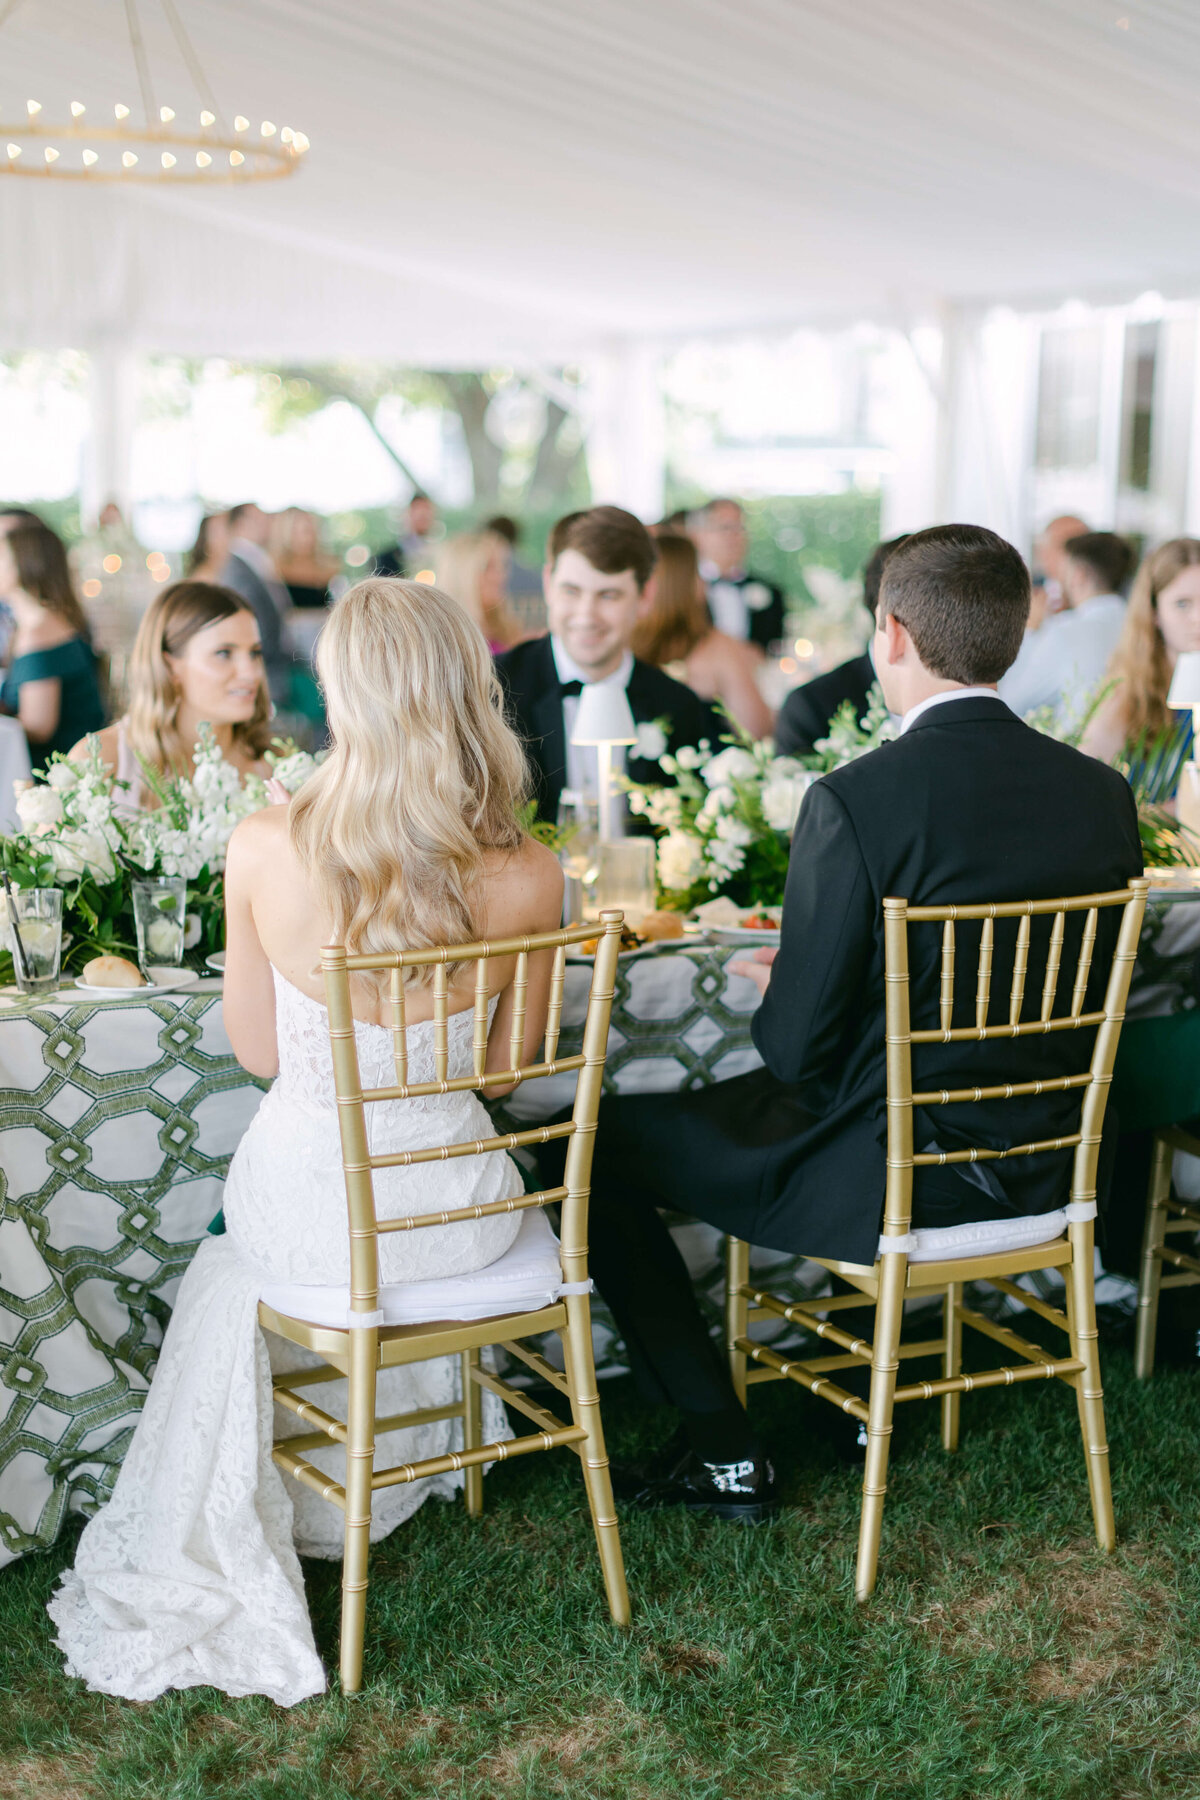 A bride and groom sit in chairs at their wedding reception.